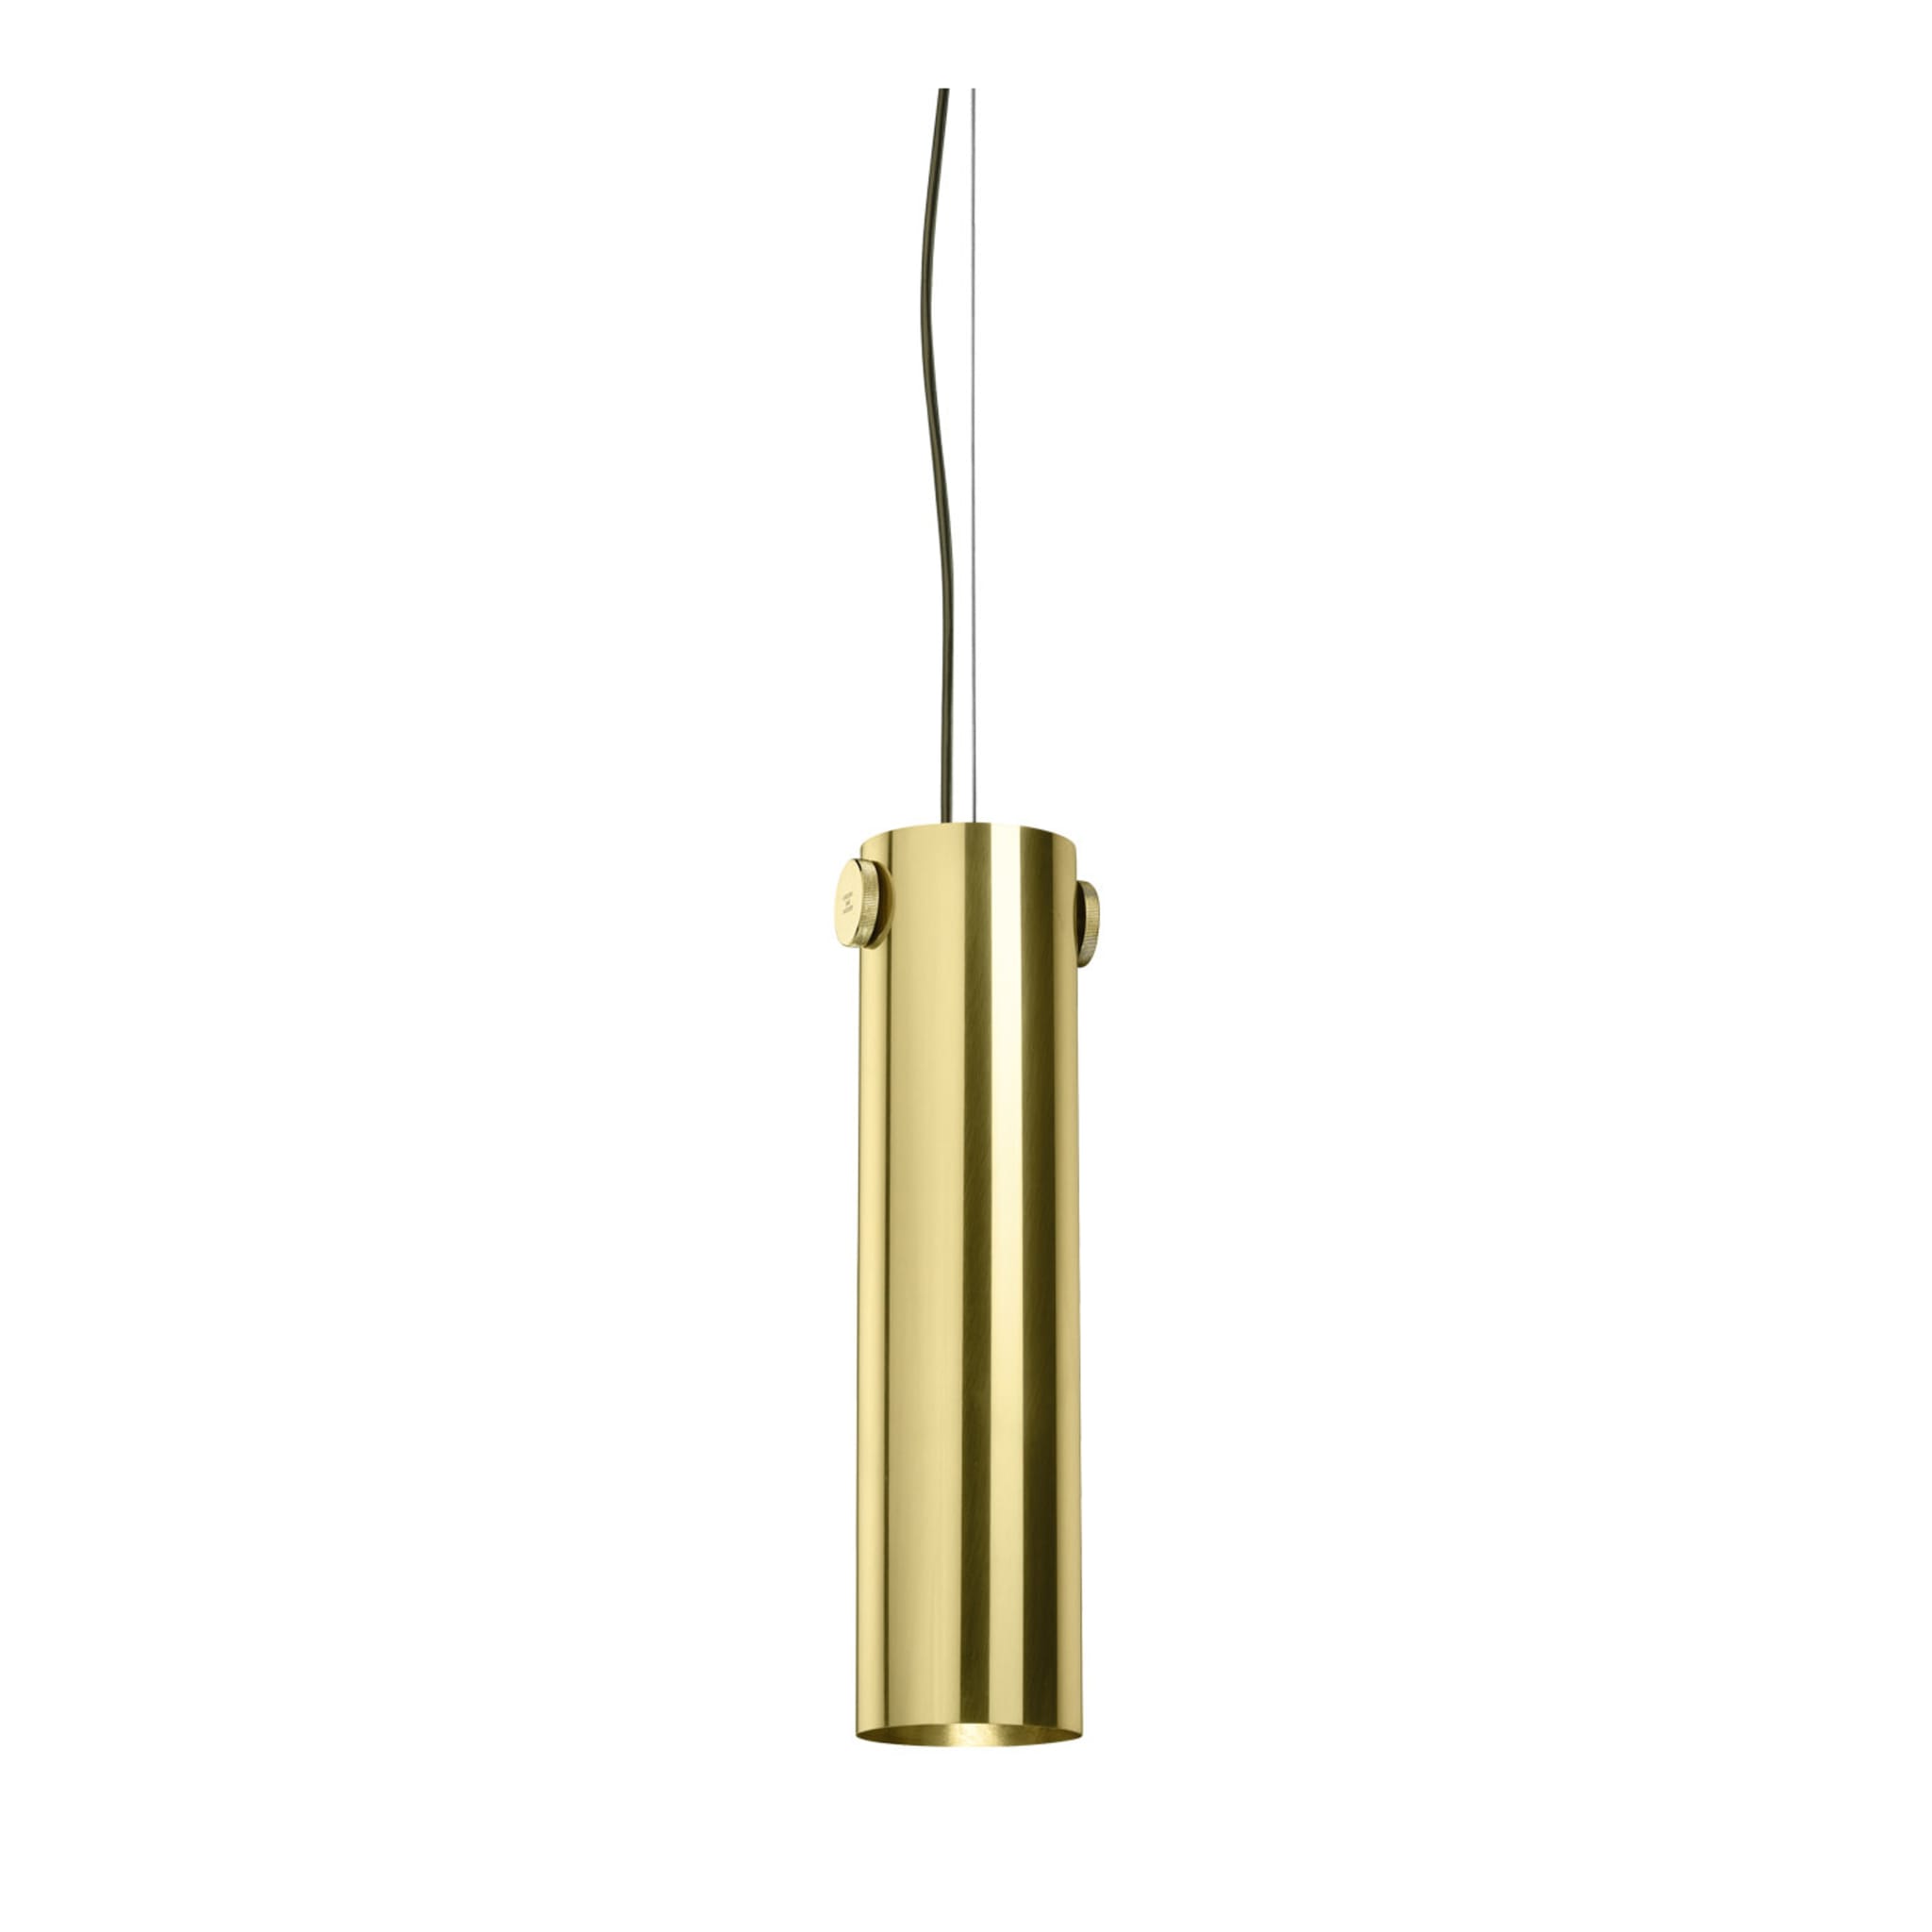 Cylinder Suspension Lamp in Polished Brass By Richard Hutten - Main view